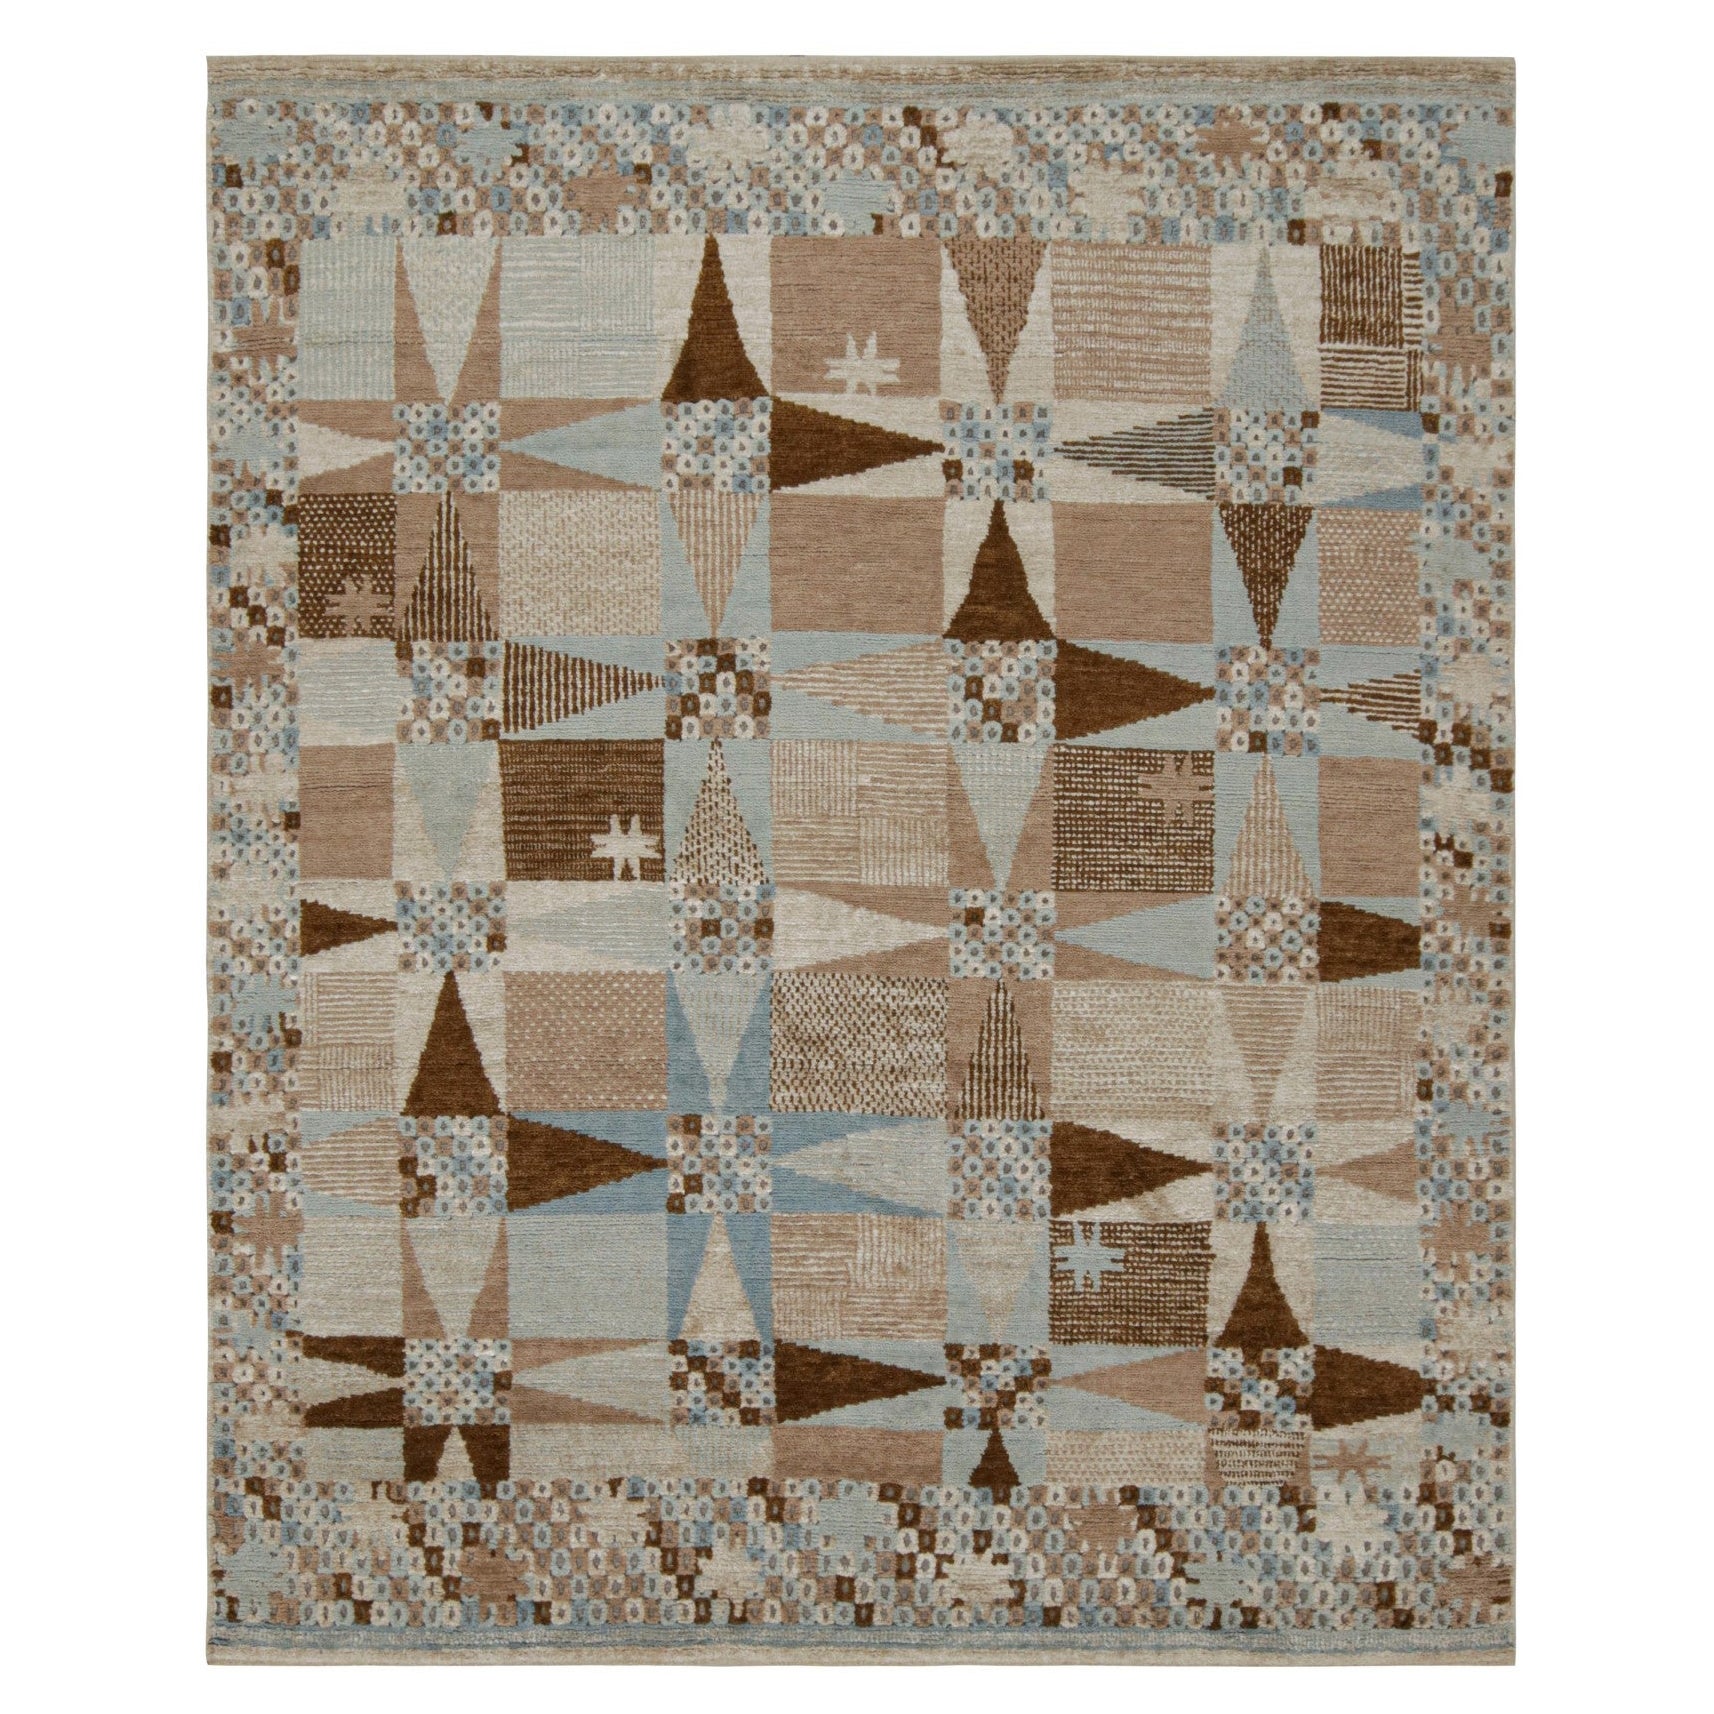 Rug & Kilim’s Oushak Style Rug with Geometric Patterns in Brown and Rust Tones